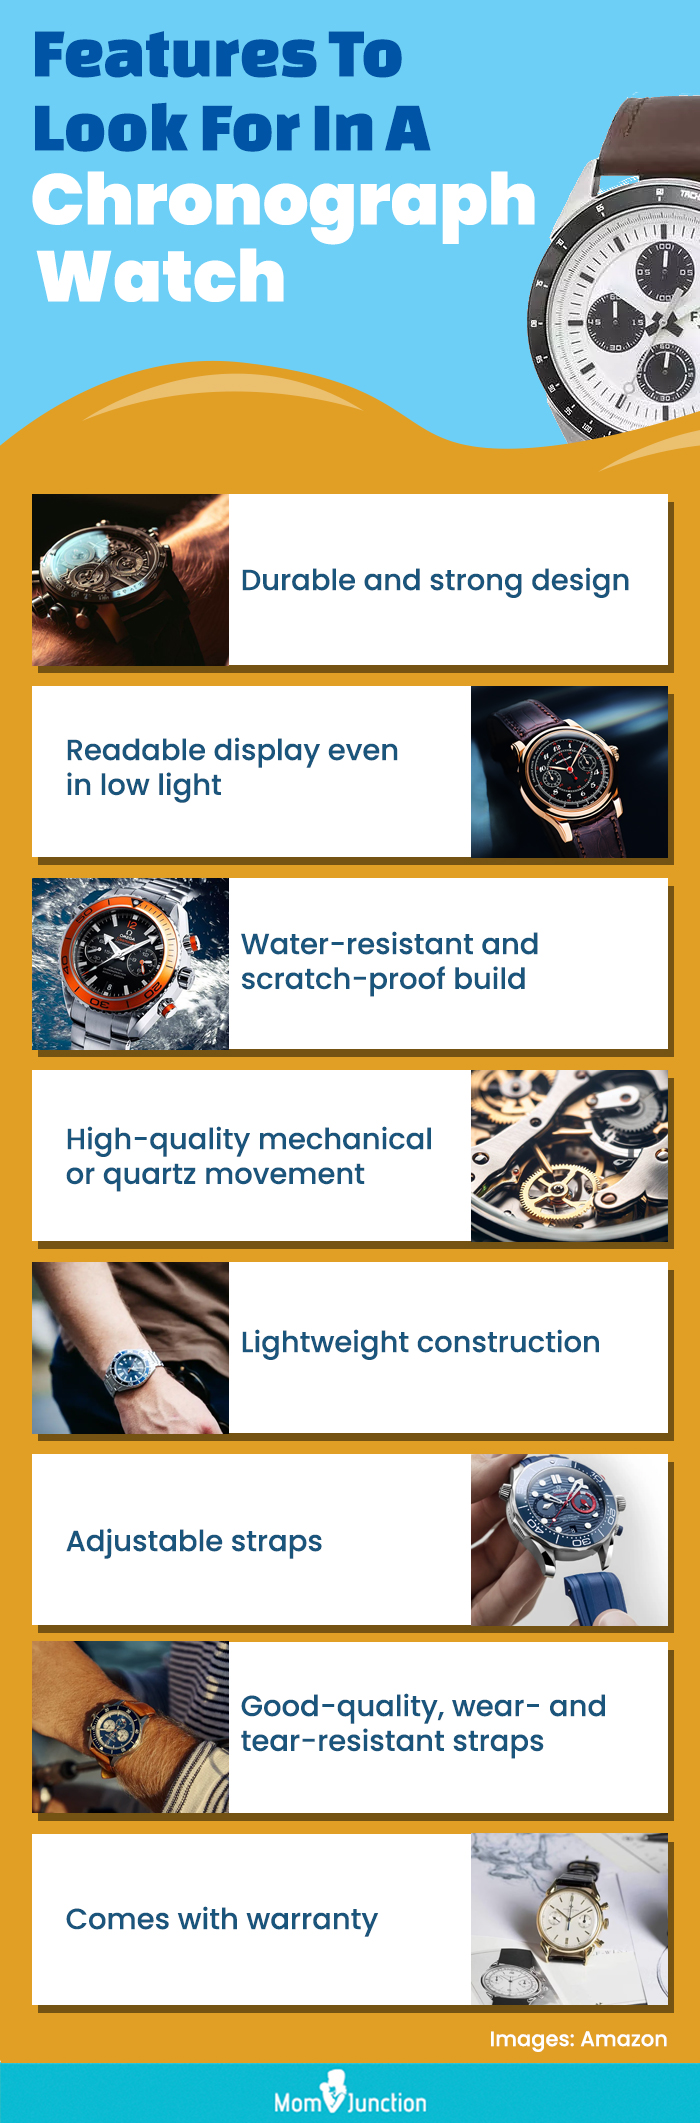 Features To Look For In A Chronograph Watch (infographic)